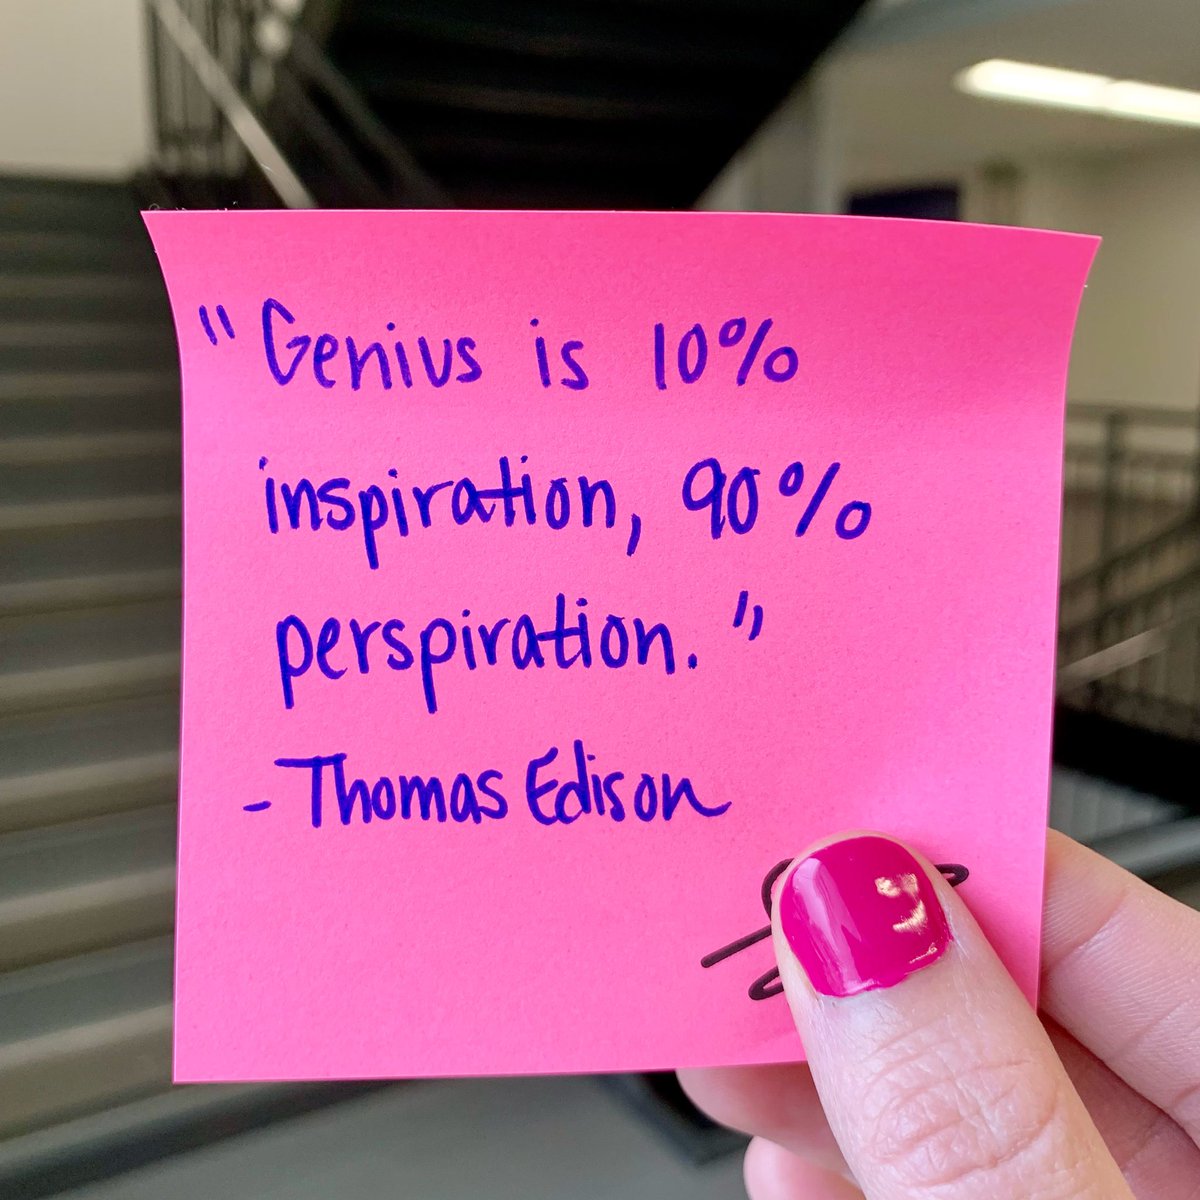 It’s a brand new week to inspire and learn! ✨ #mondaymotivation #pmlearns